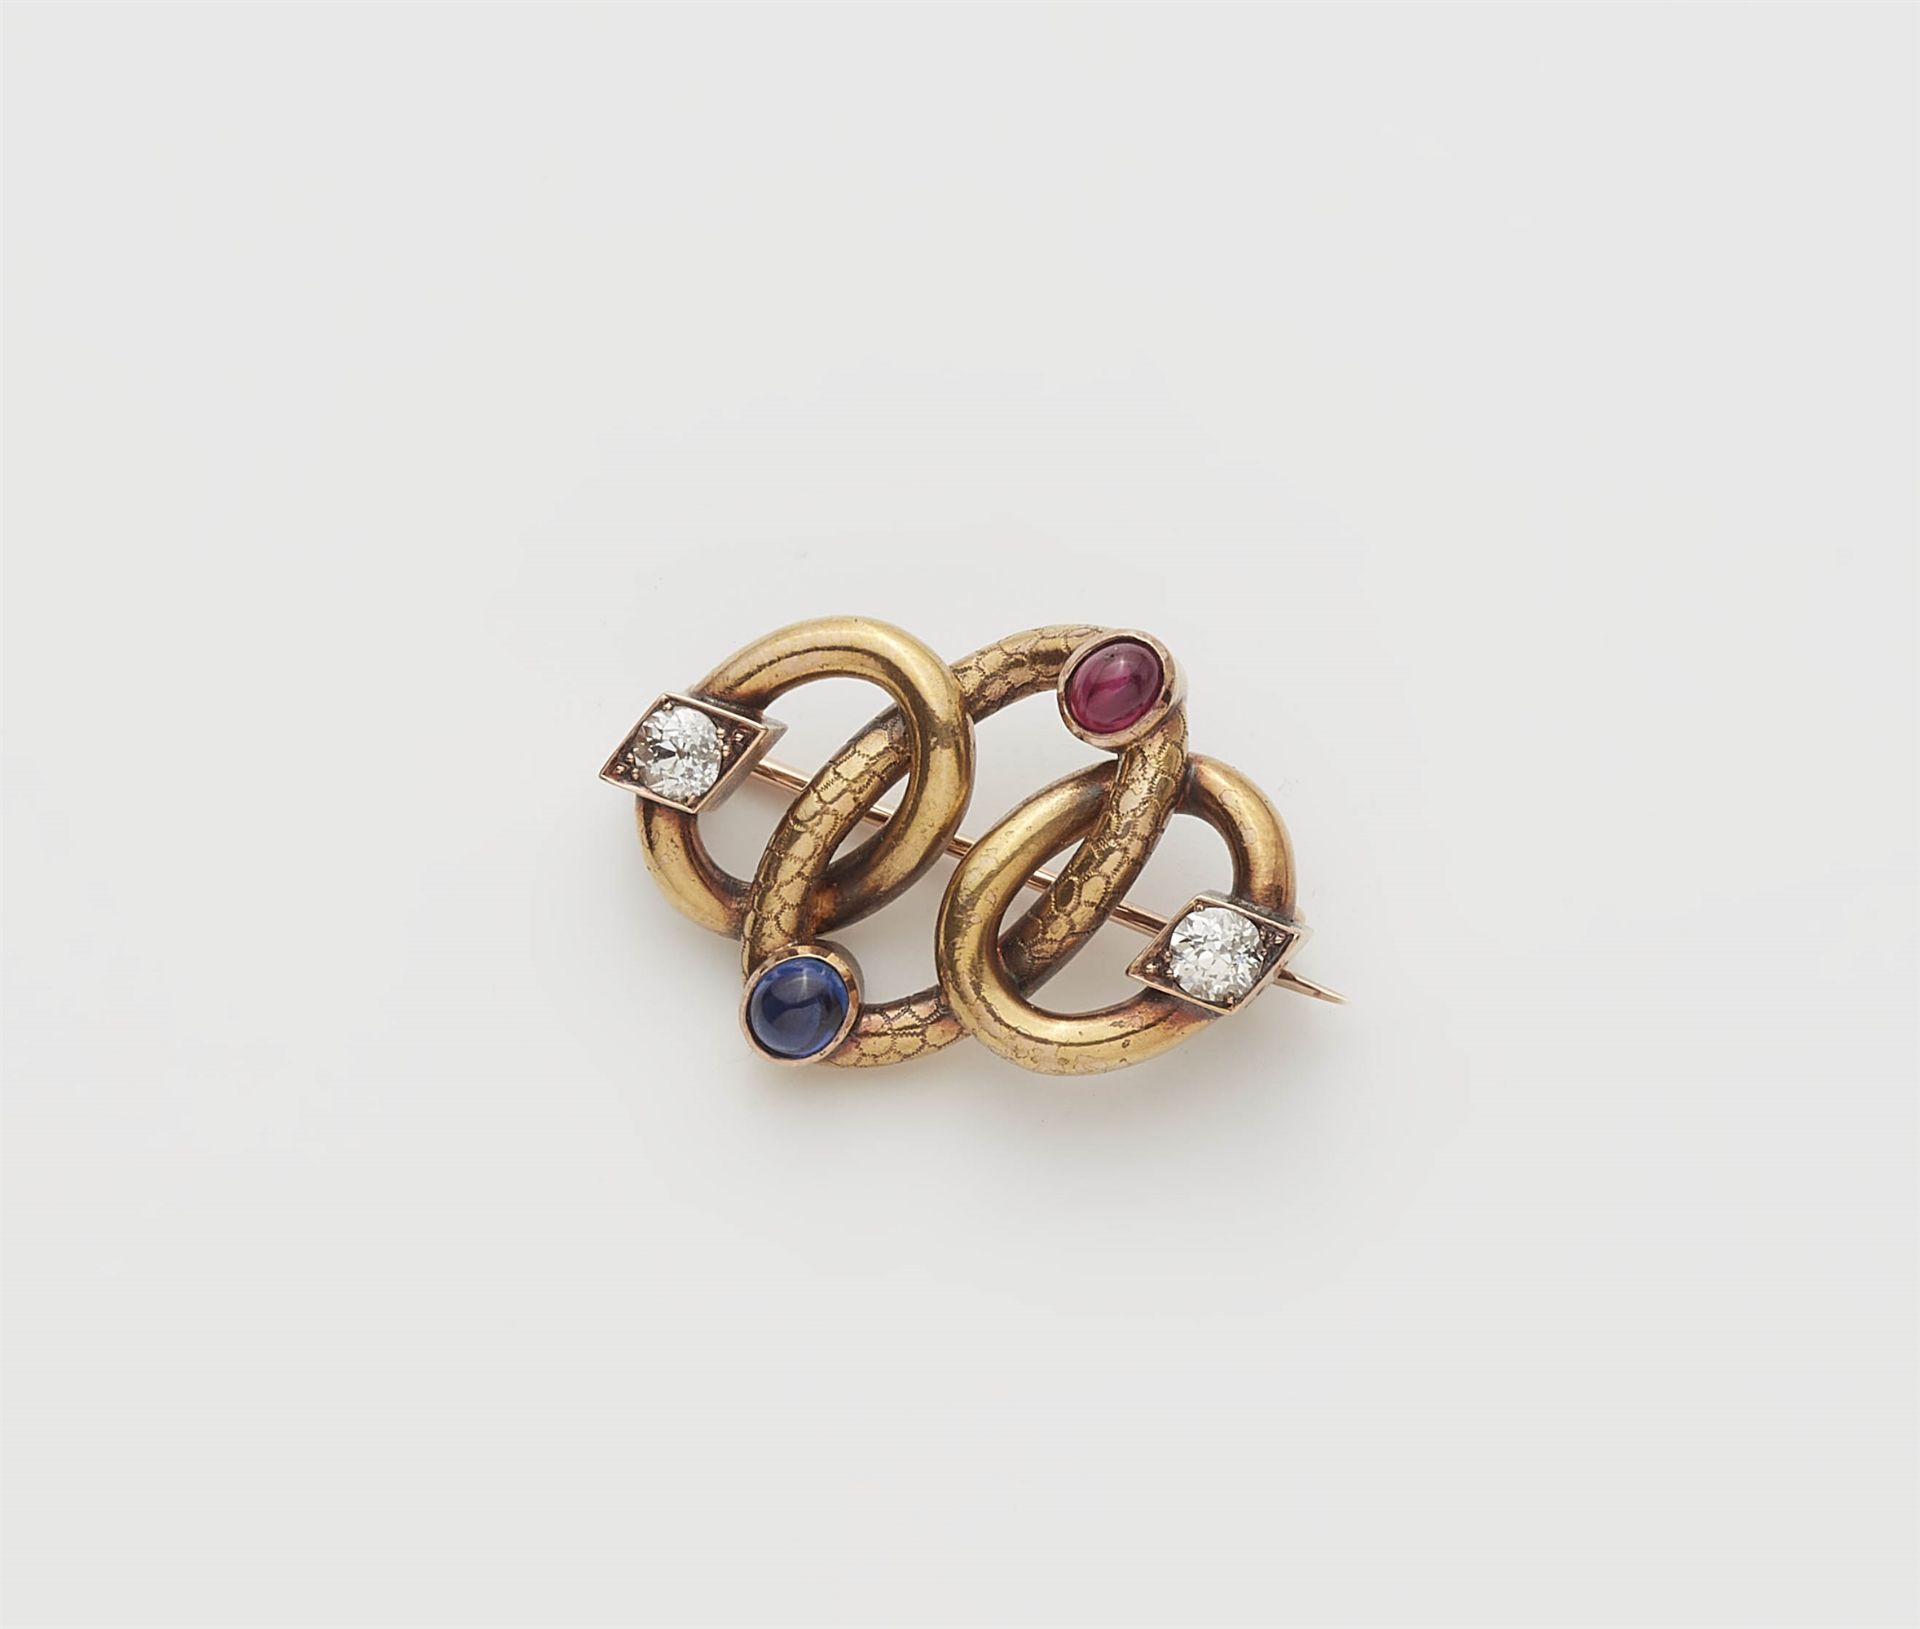 A late 19th century 14k gold sapphire ruby and diamond brooch.